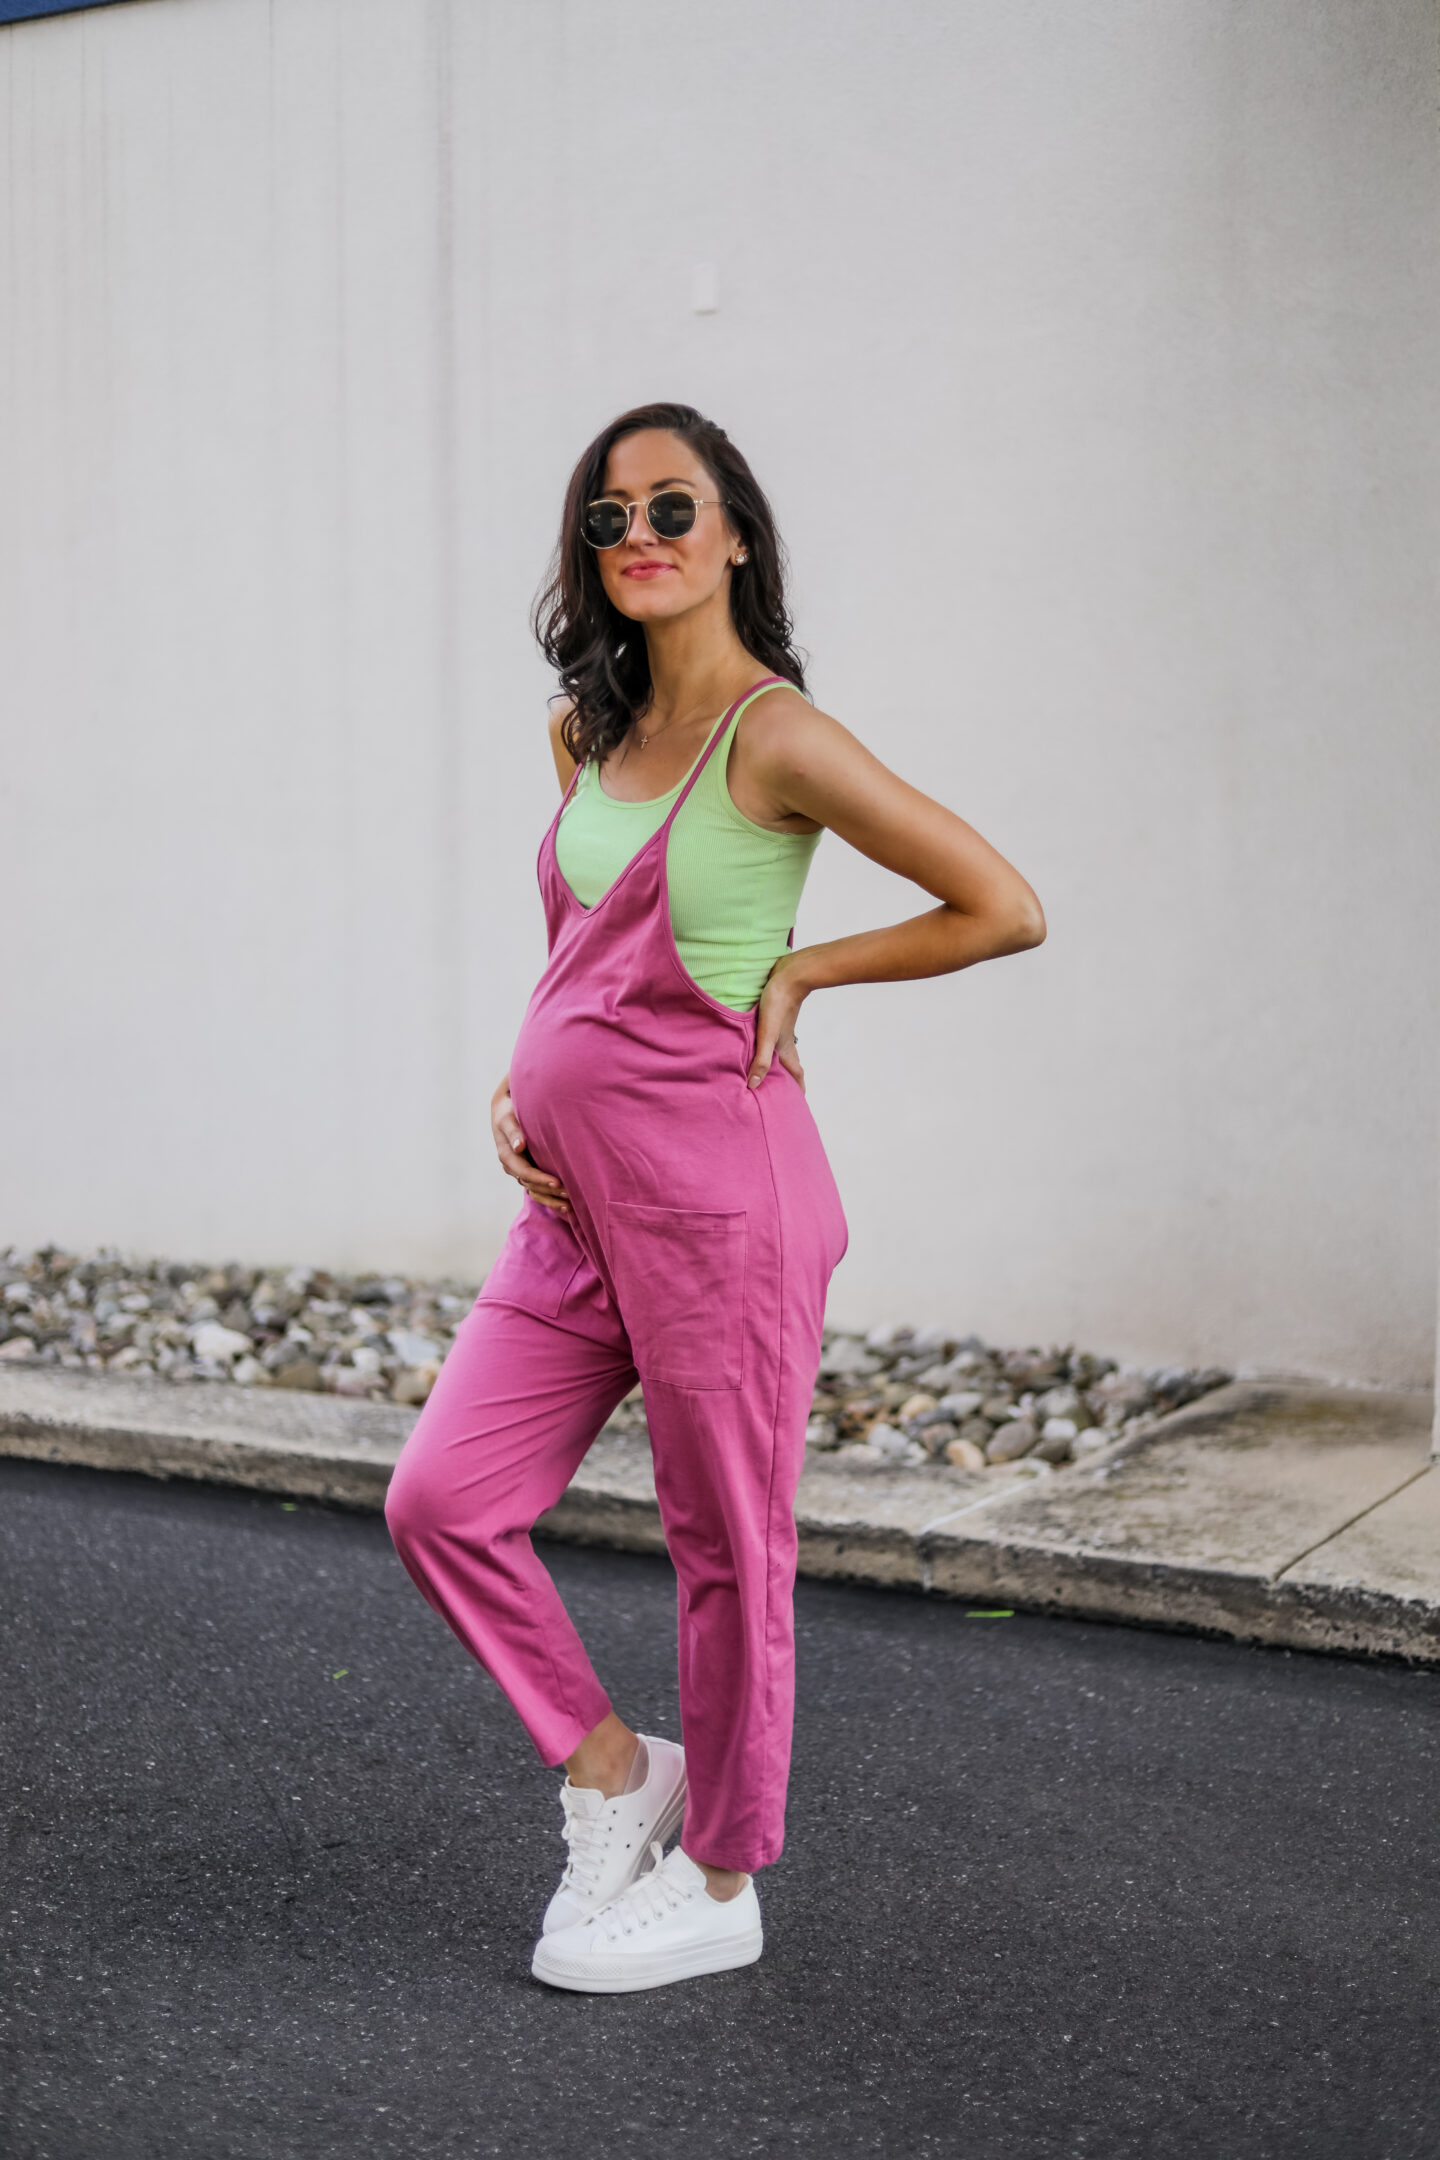 FREE PEOPLE HOT SHOT ONESIE DUPE - Get the look for less with this affordable Amazon jumpsuit!